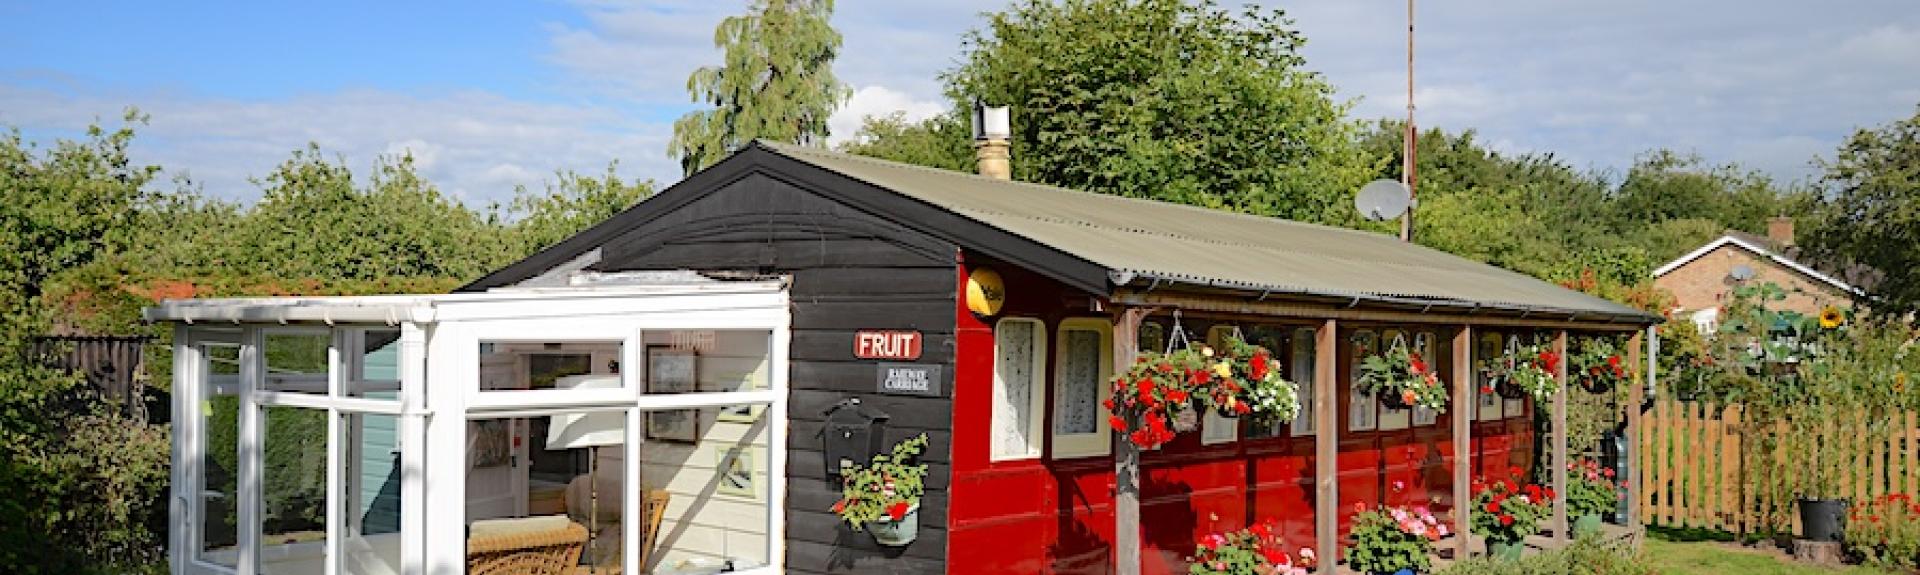 Eterior of a vintage railway carriage converted to a holiday rental in a garden.